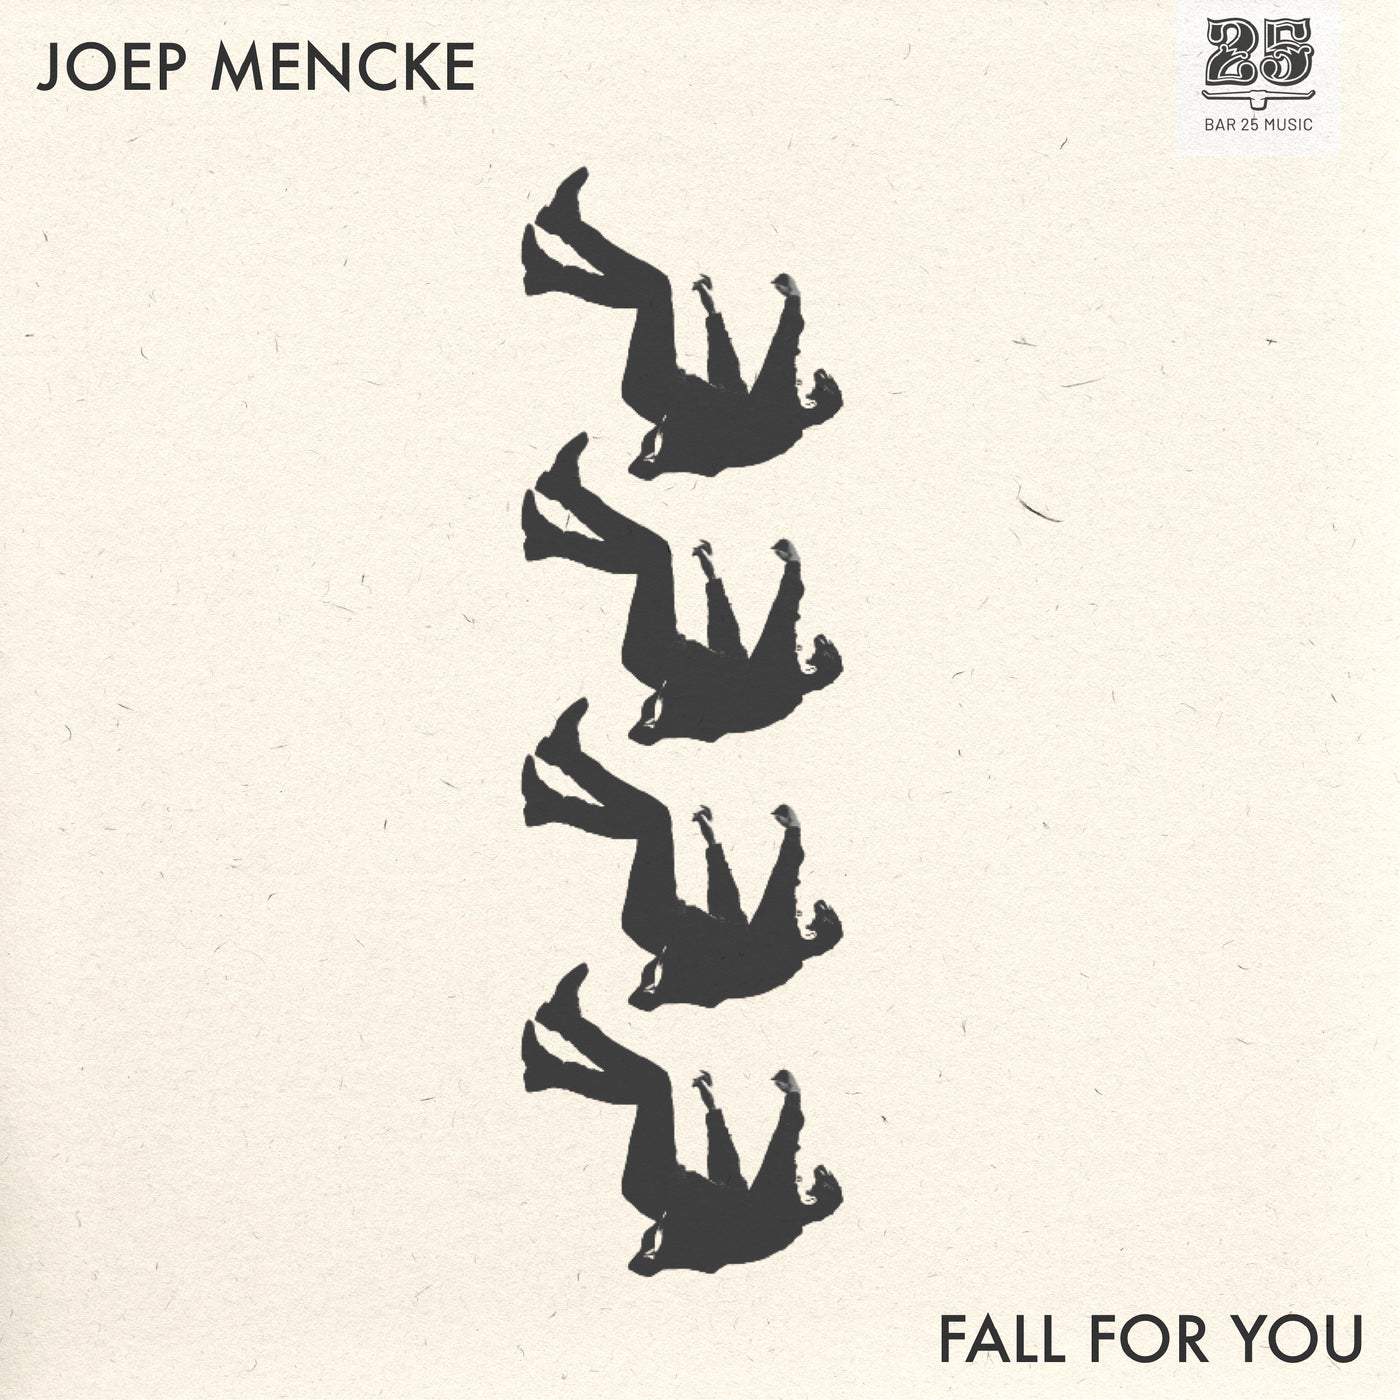 image cover: Fall For You by Ben Juno & Joep Mencke on Bar 25 Music